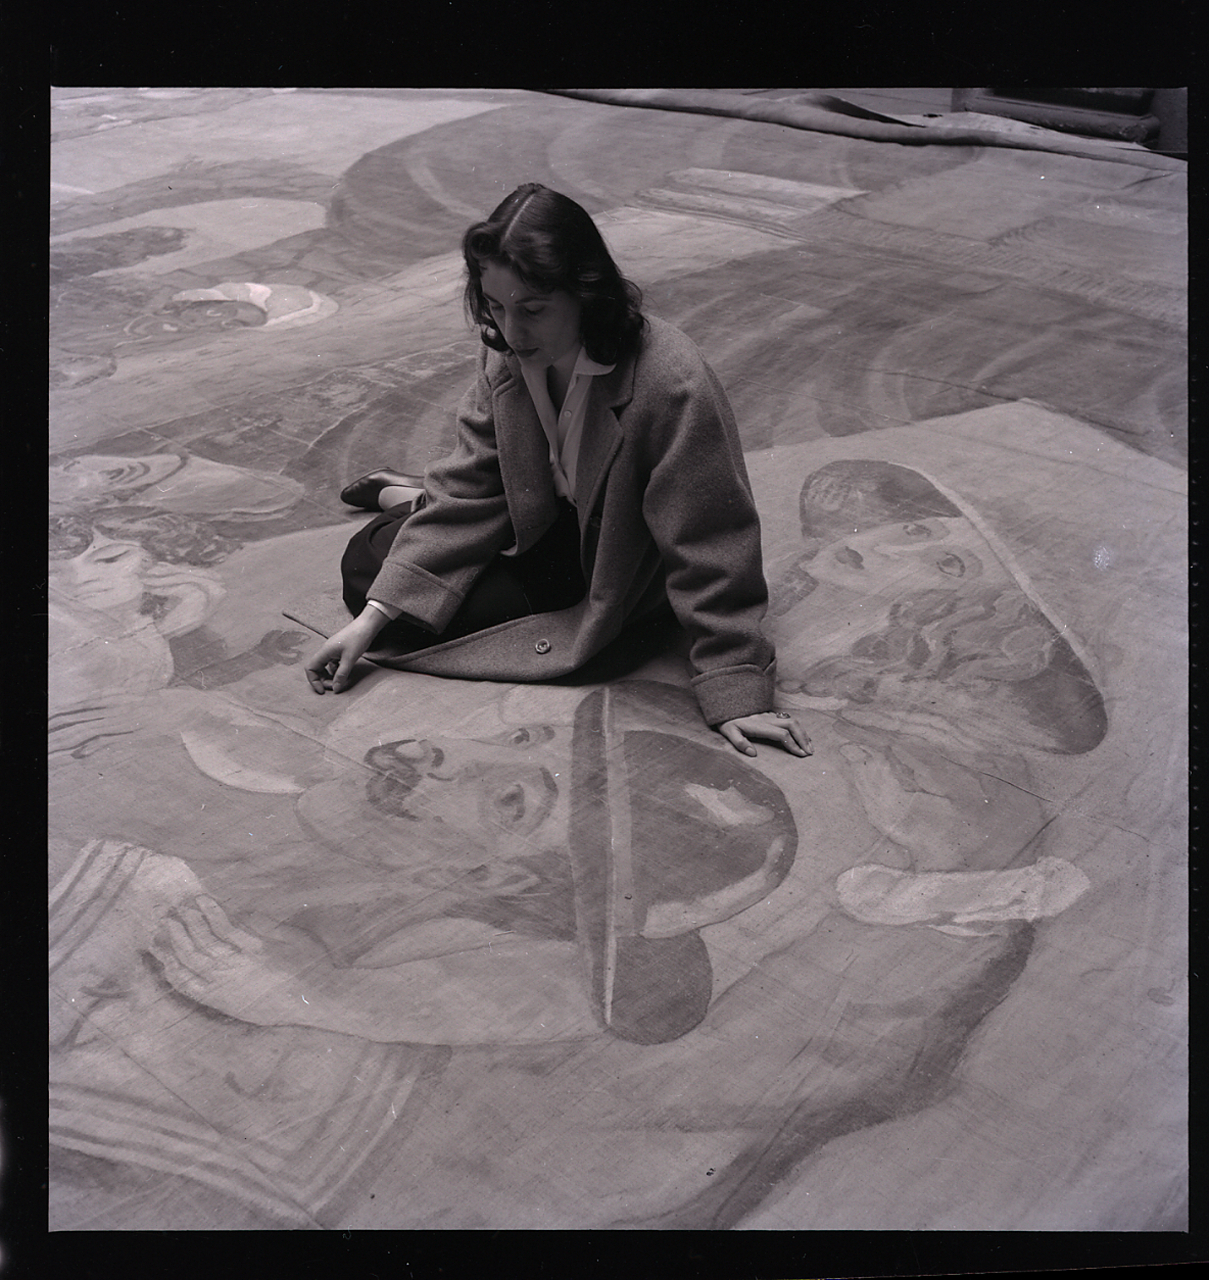 Milena Milani in 1958 photographed by Paolo Monti